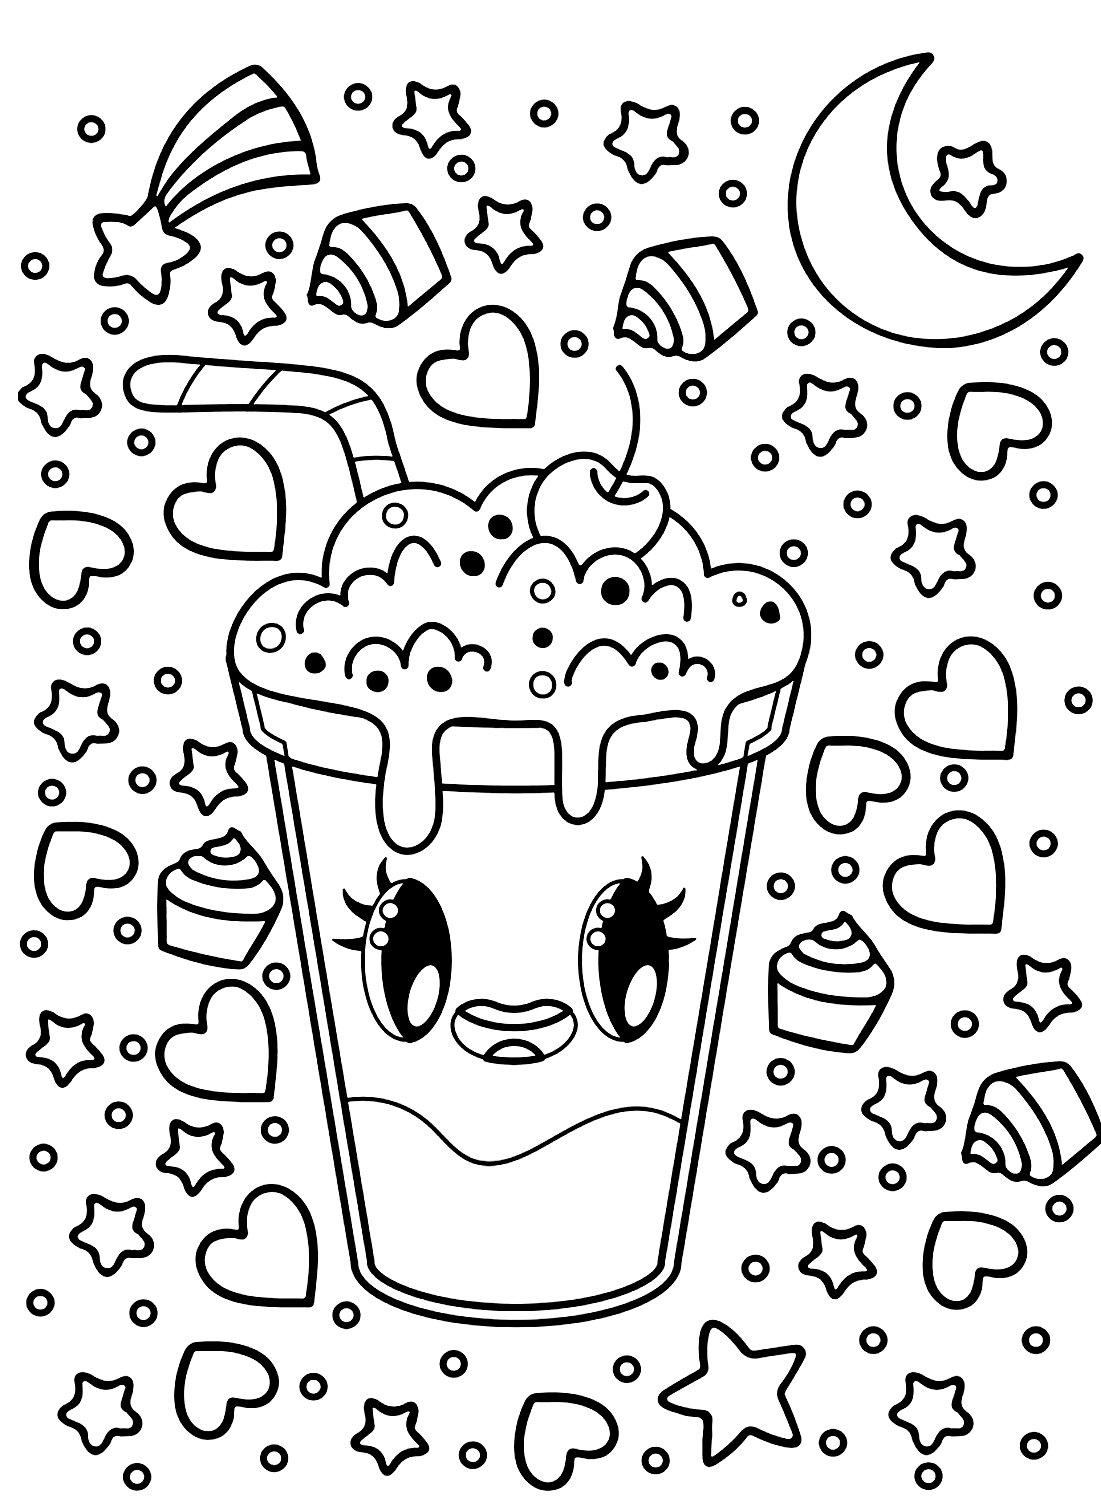 Cute printable coloring pages